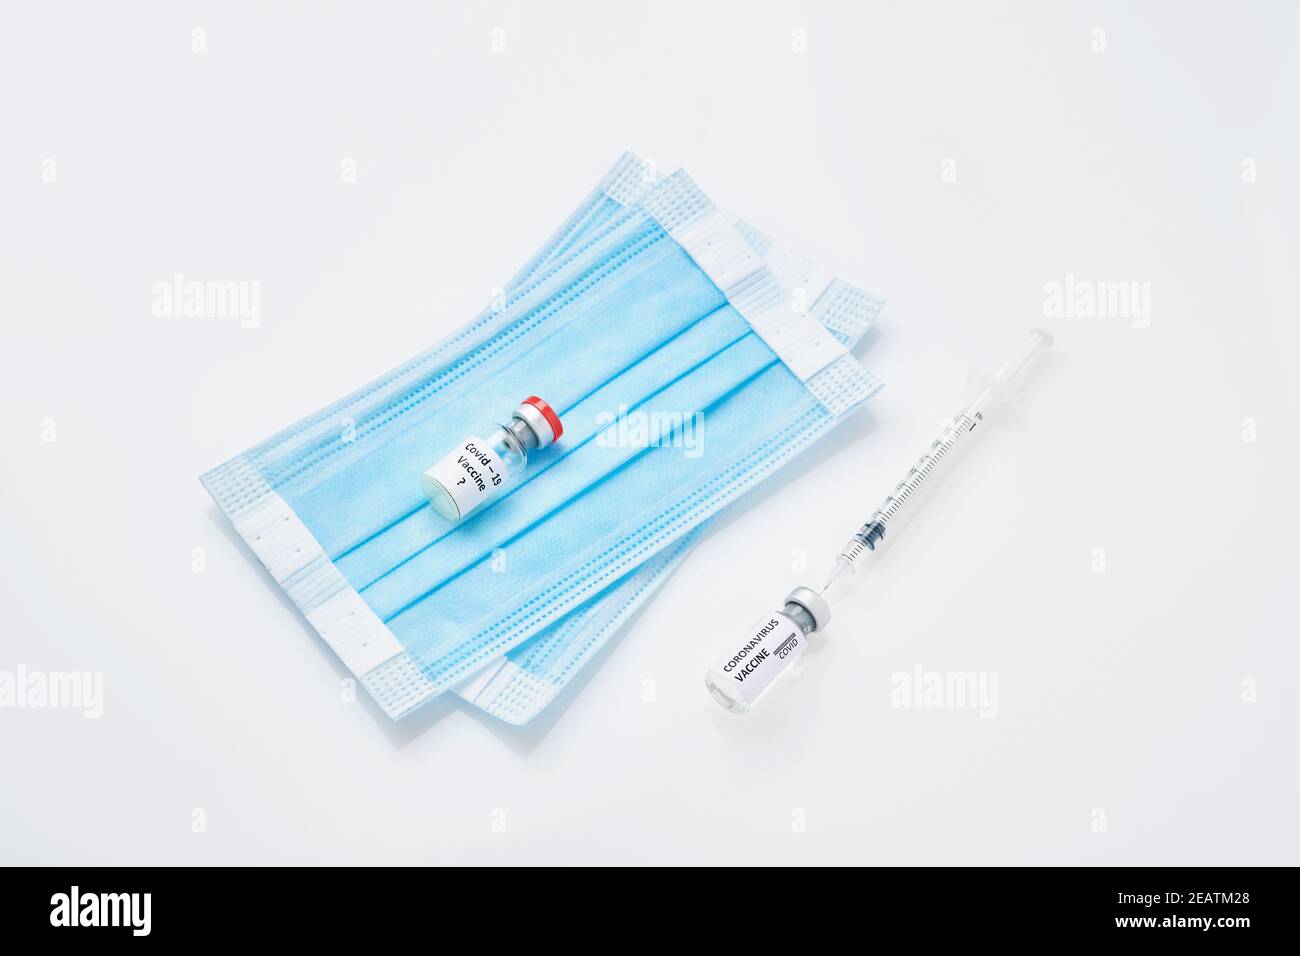 Coronavirus prevention vaccine, medical protective mask isolated on white background. Disposable surgical face mask cover mouth and nose. Healthcare m Stock Photo